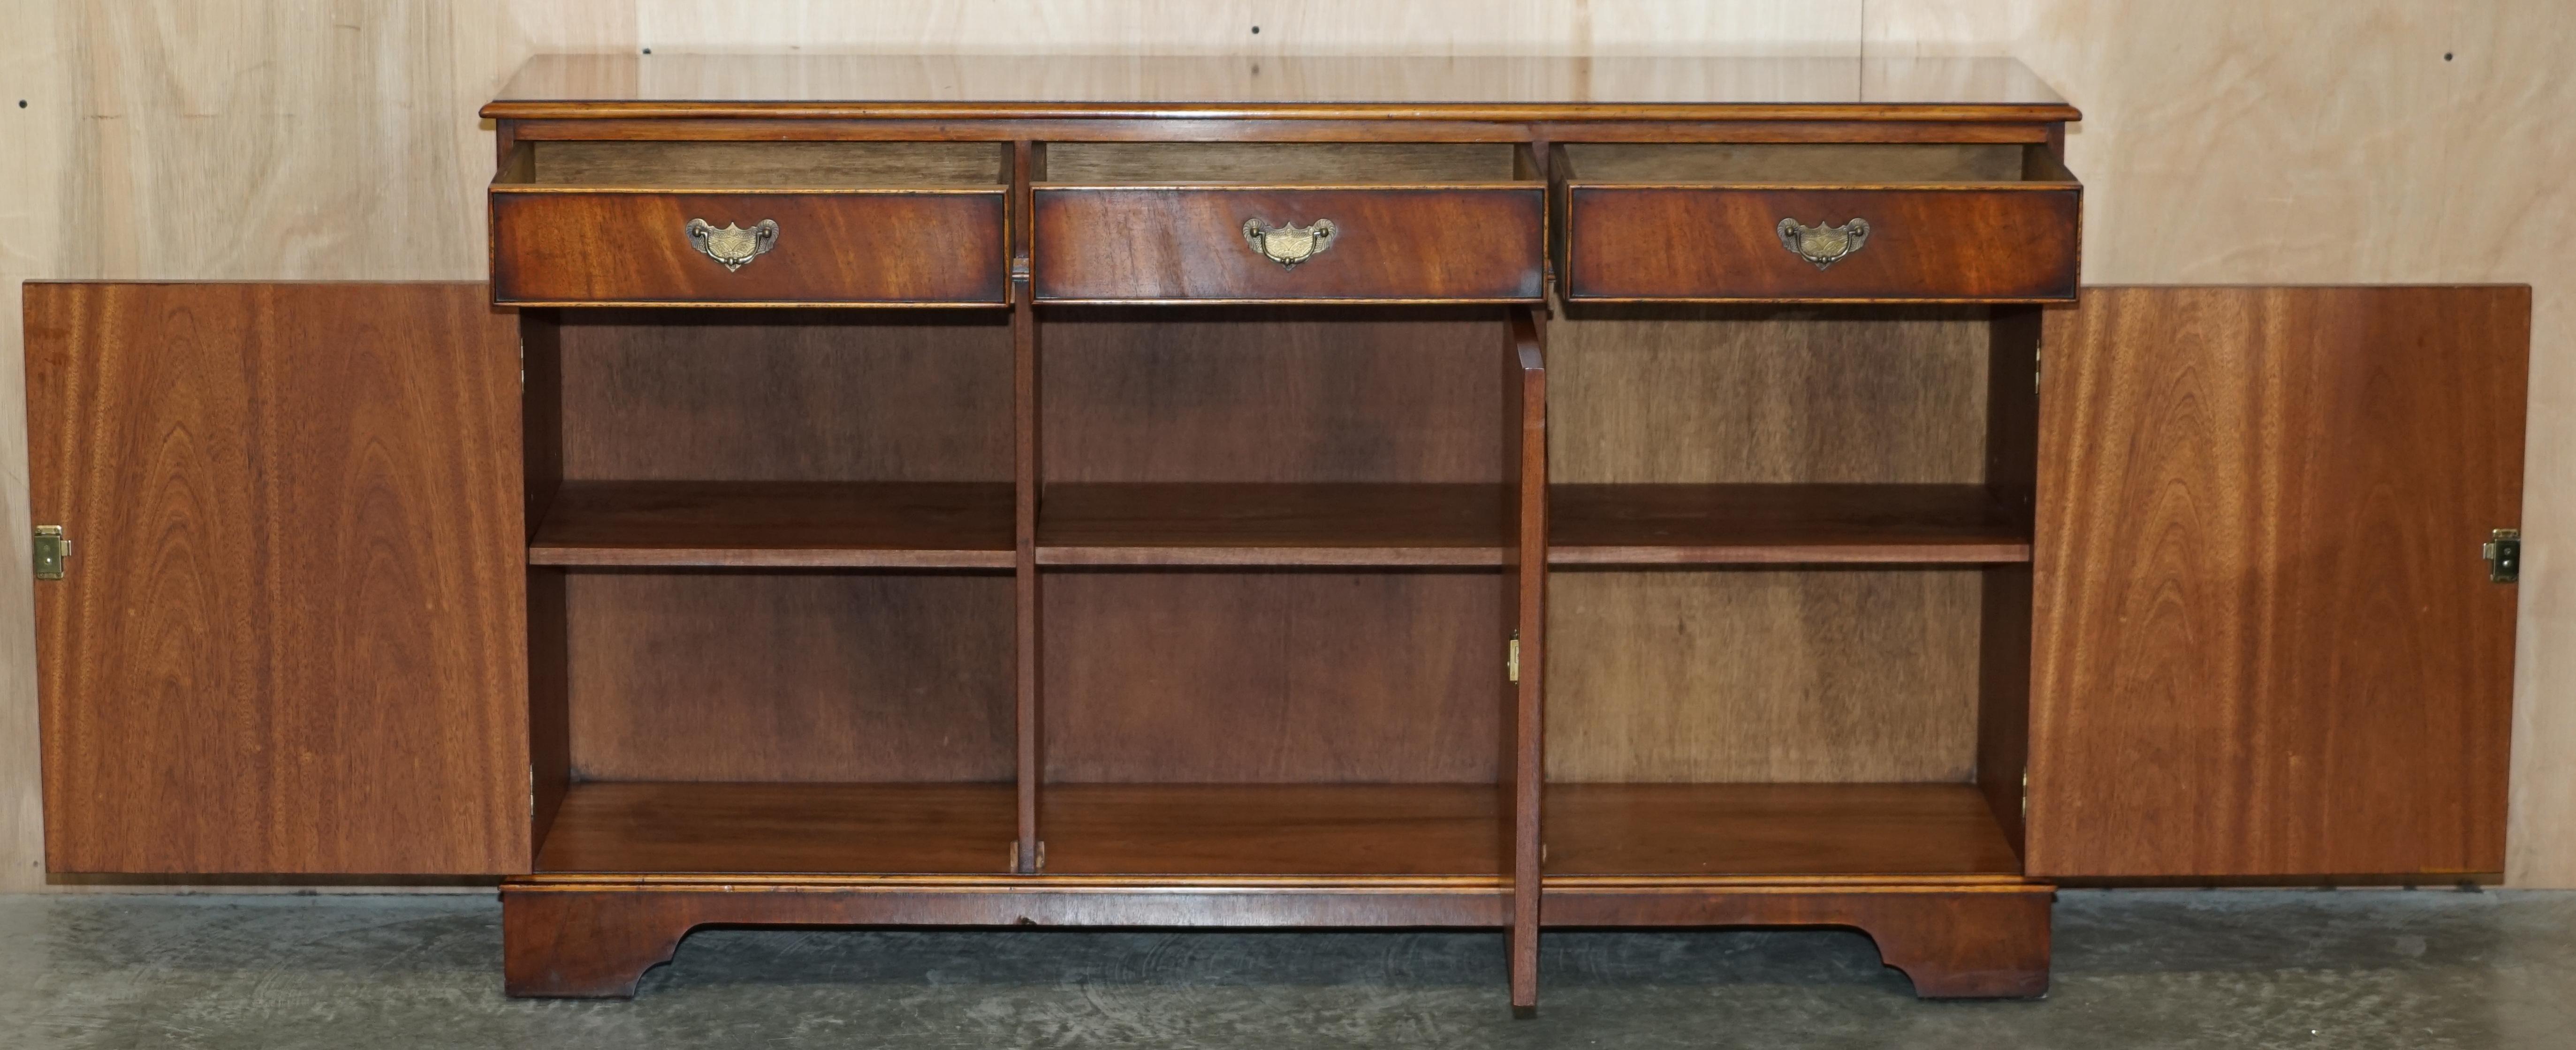 Stunning Vintage Flamed Hardwood Sideboard Bookcase with Three Large Drawers For Sale 10